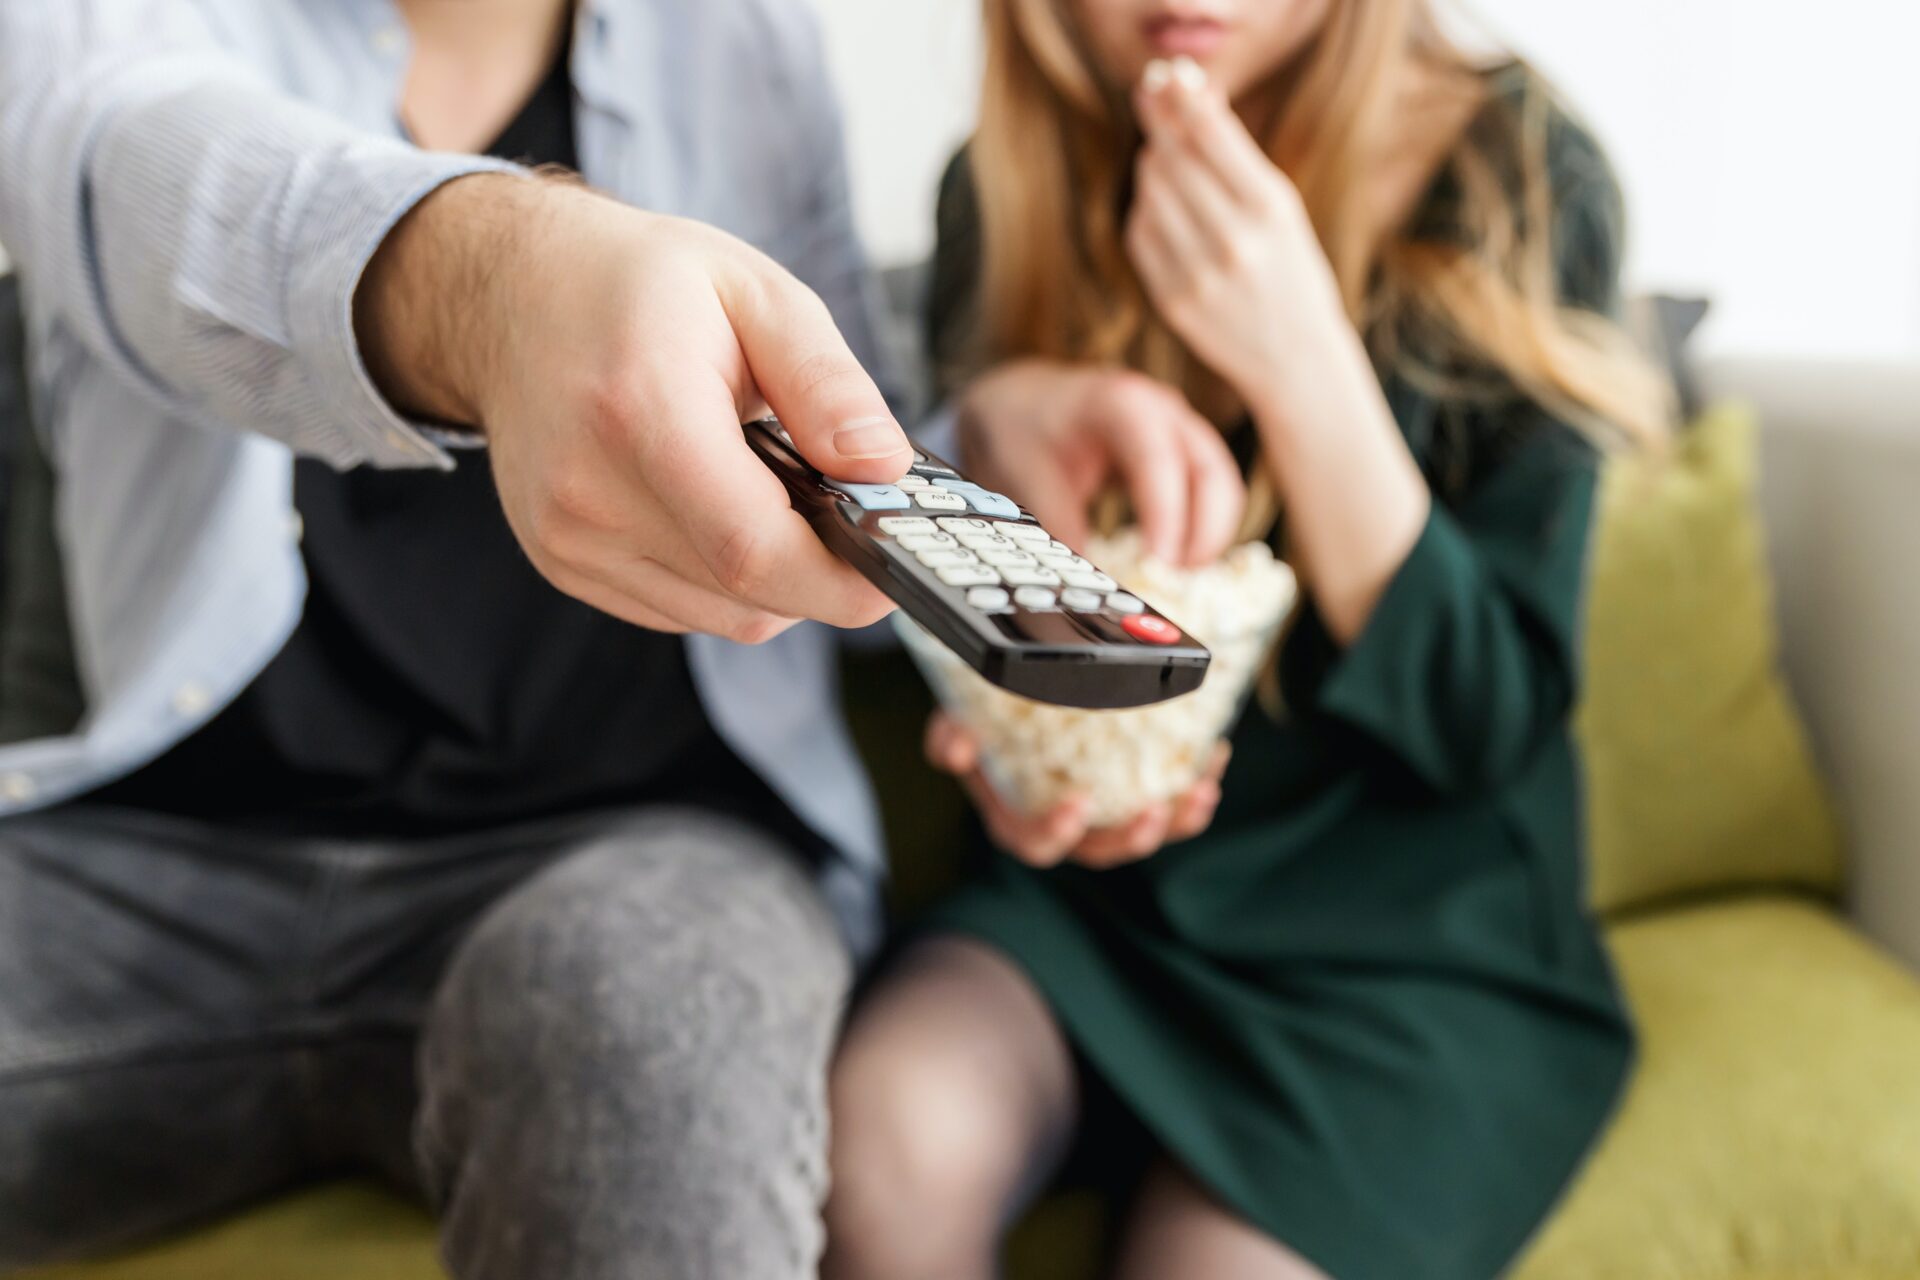 Man holding a remote as woman eats popcord.